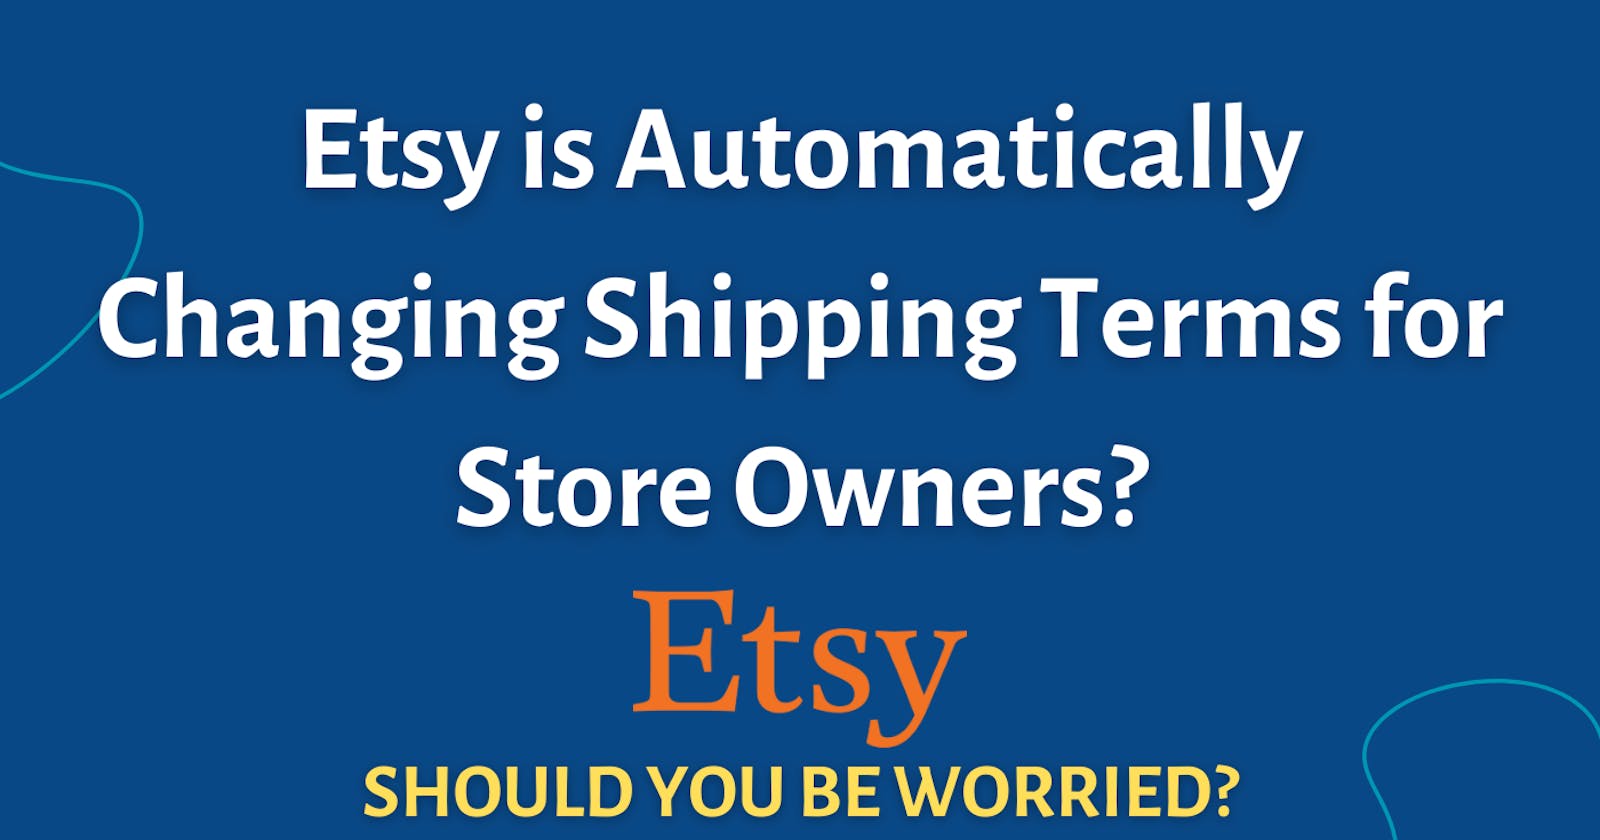 Etsy is Automatically Changing Processing Schedule for Store Owners